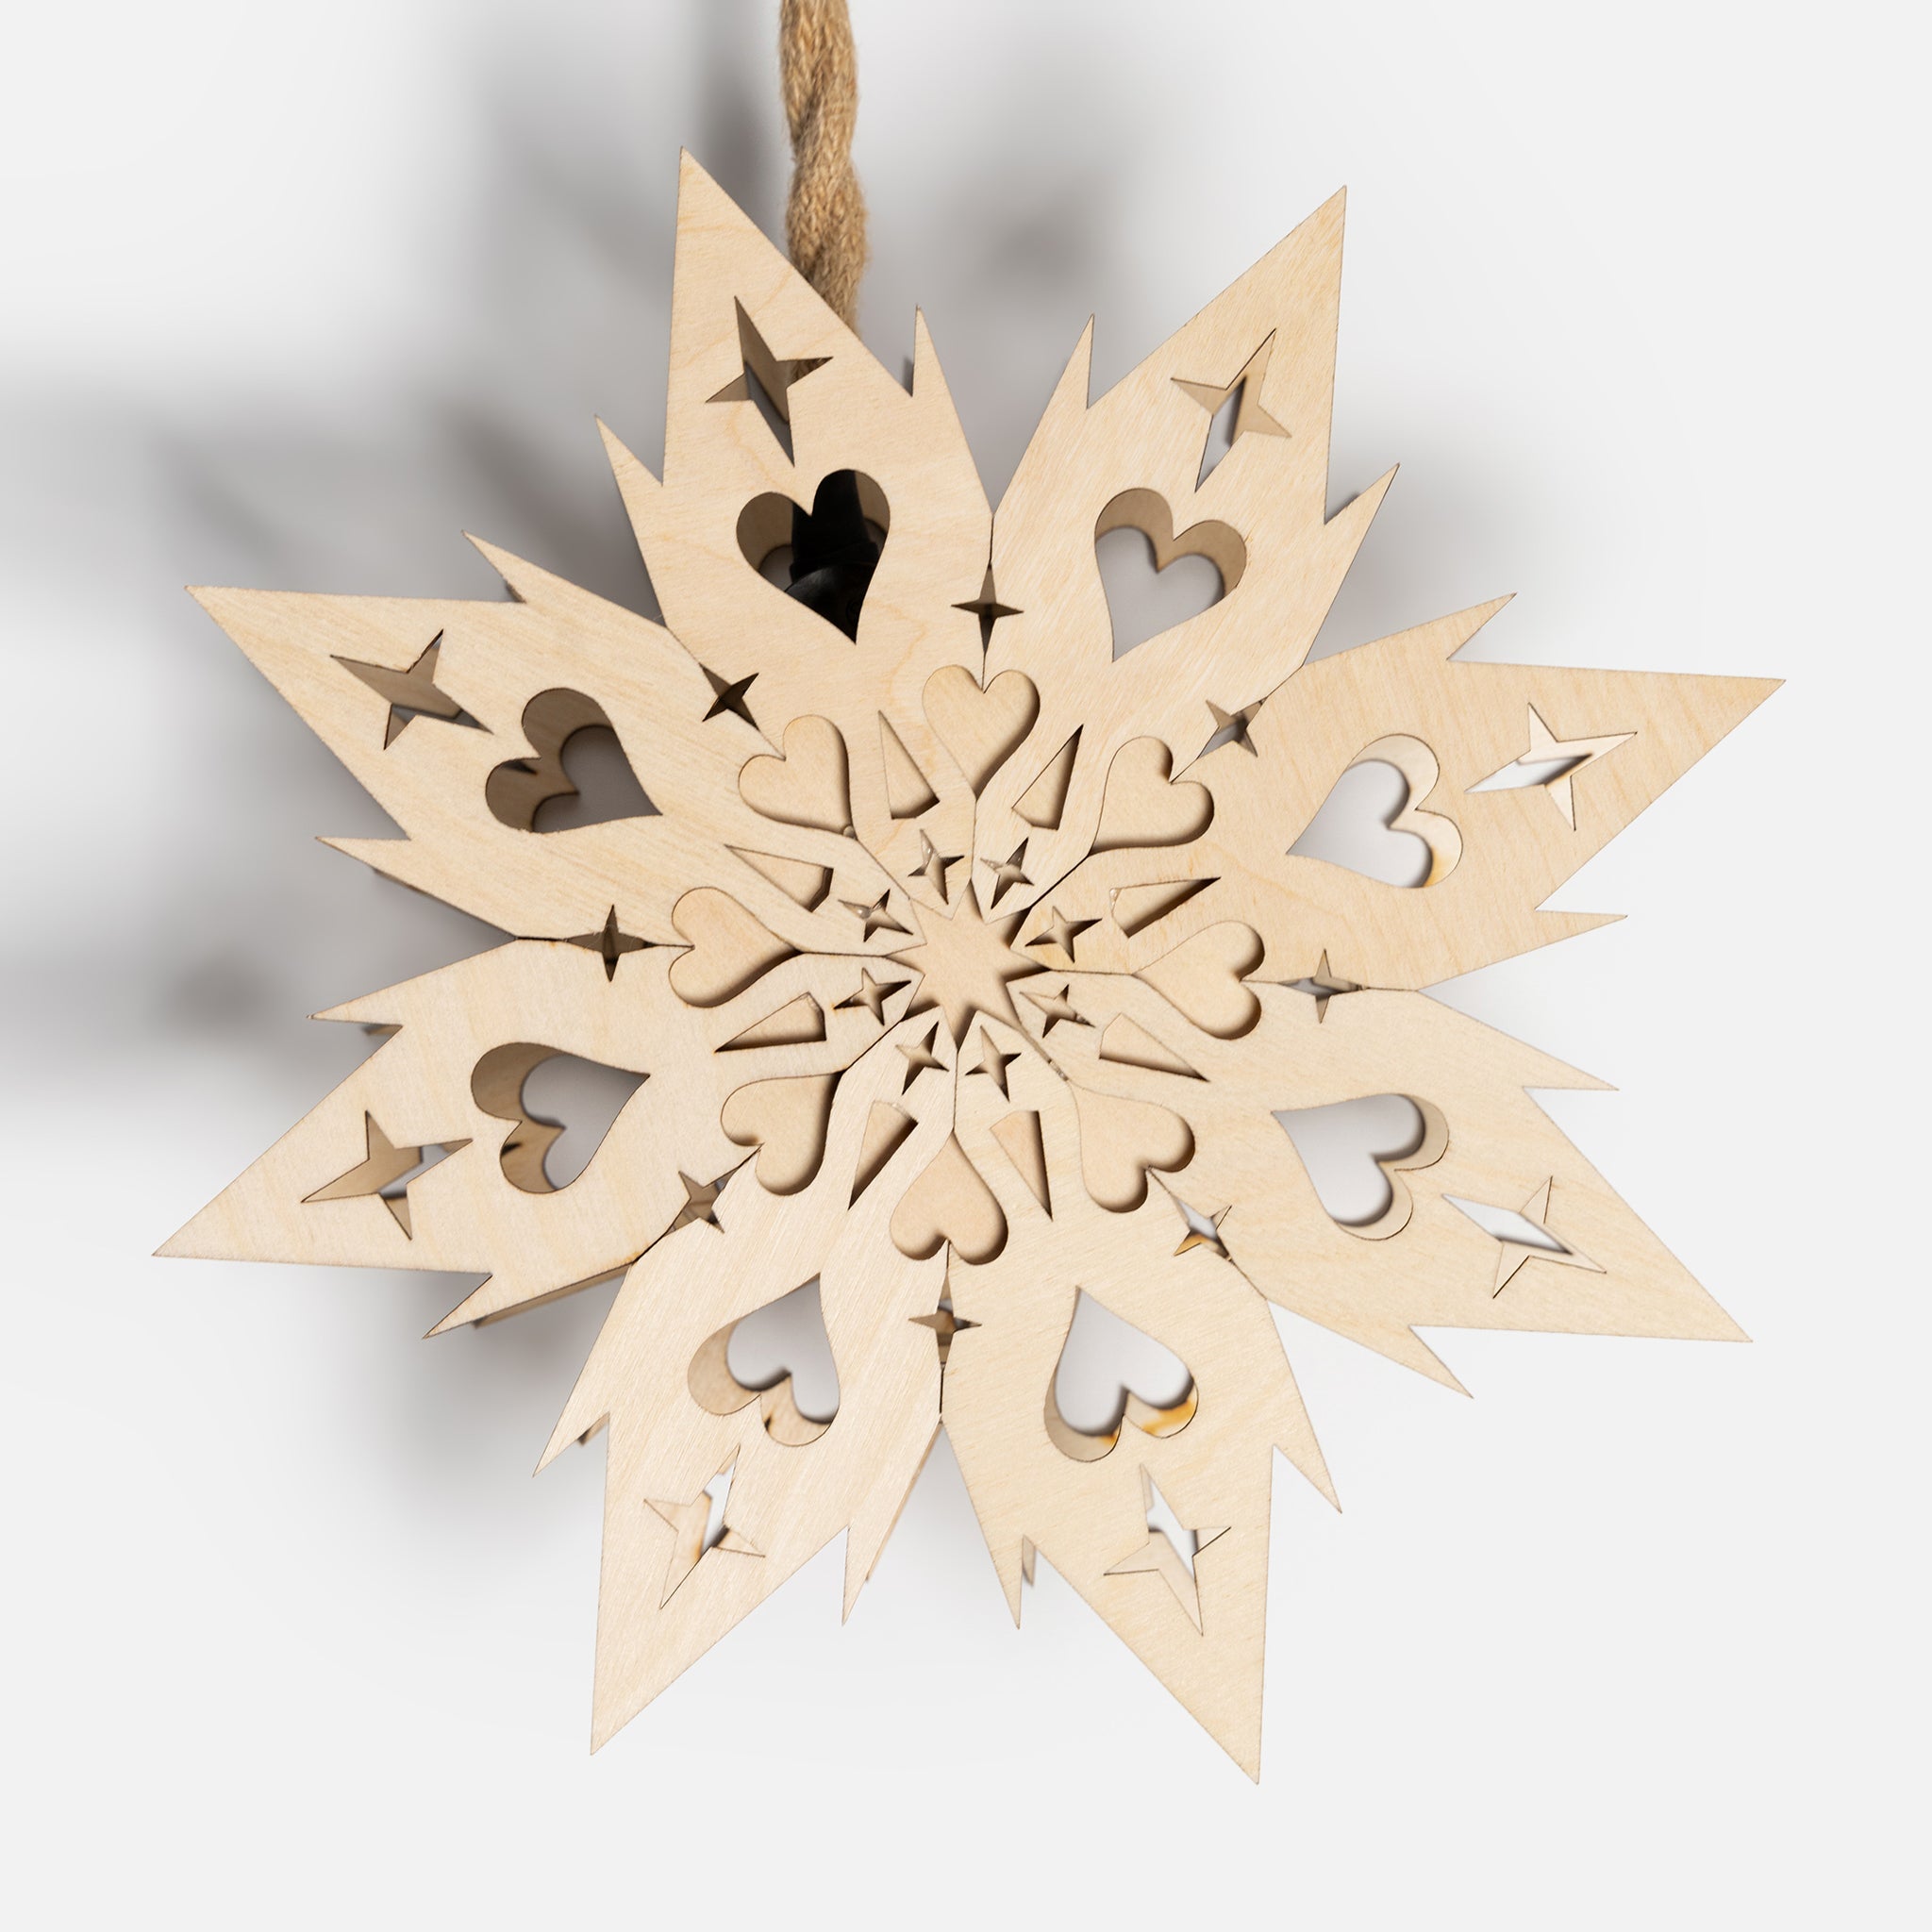 Wooden Star Light by Mike Cline - Twelve Inches